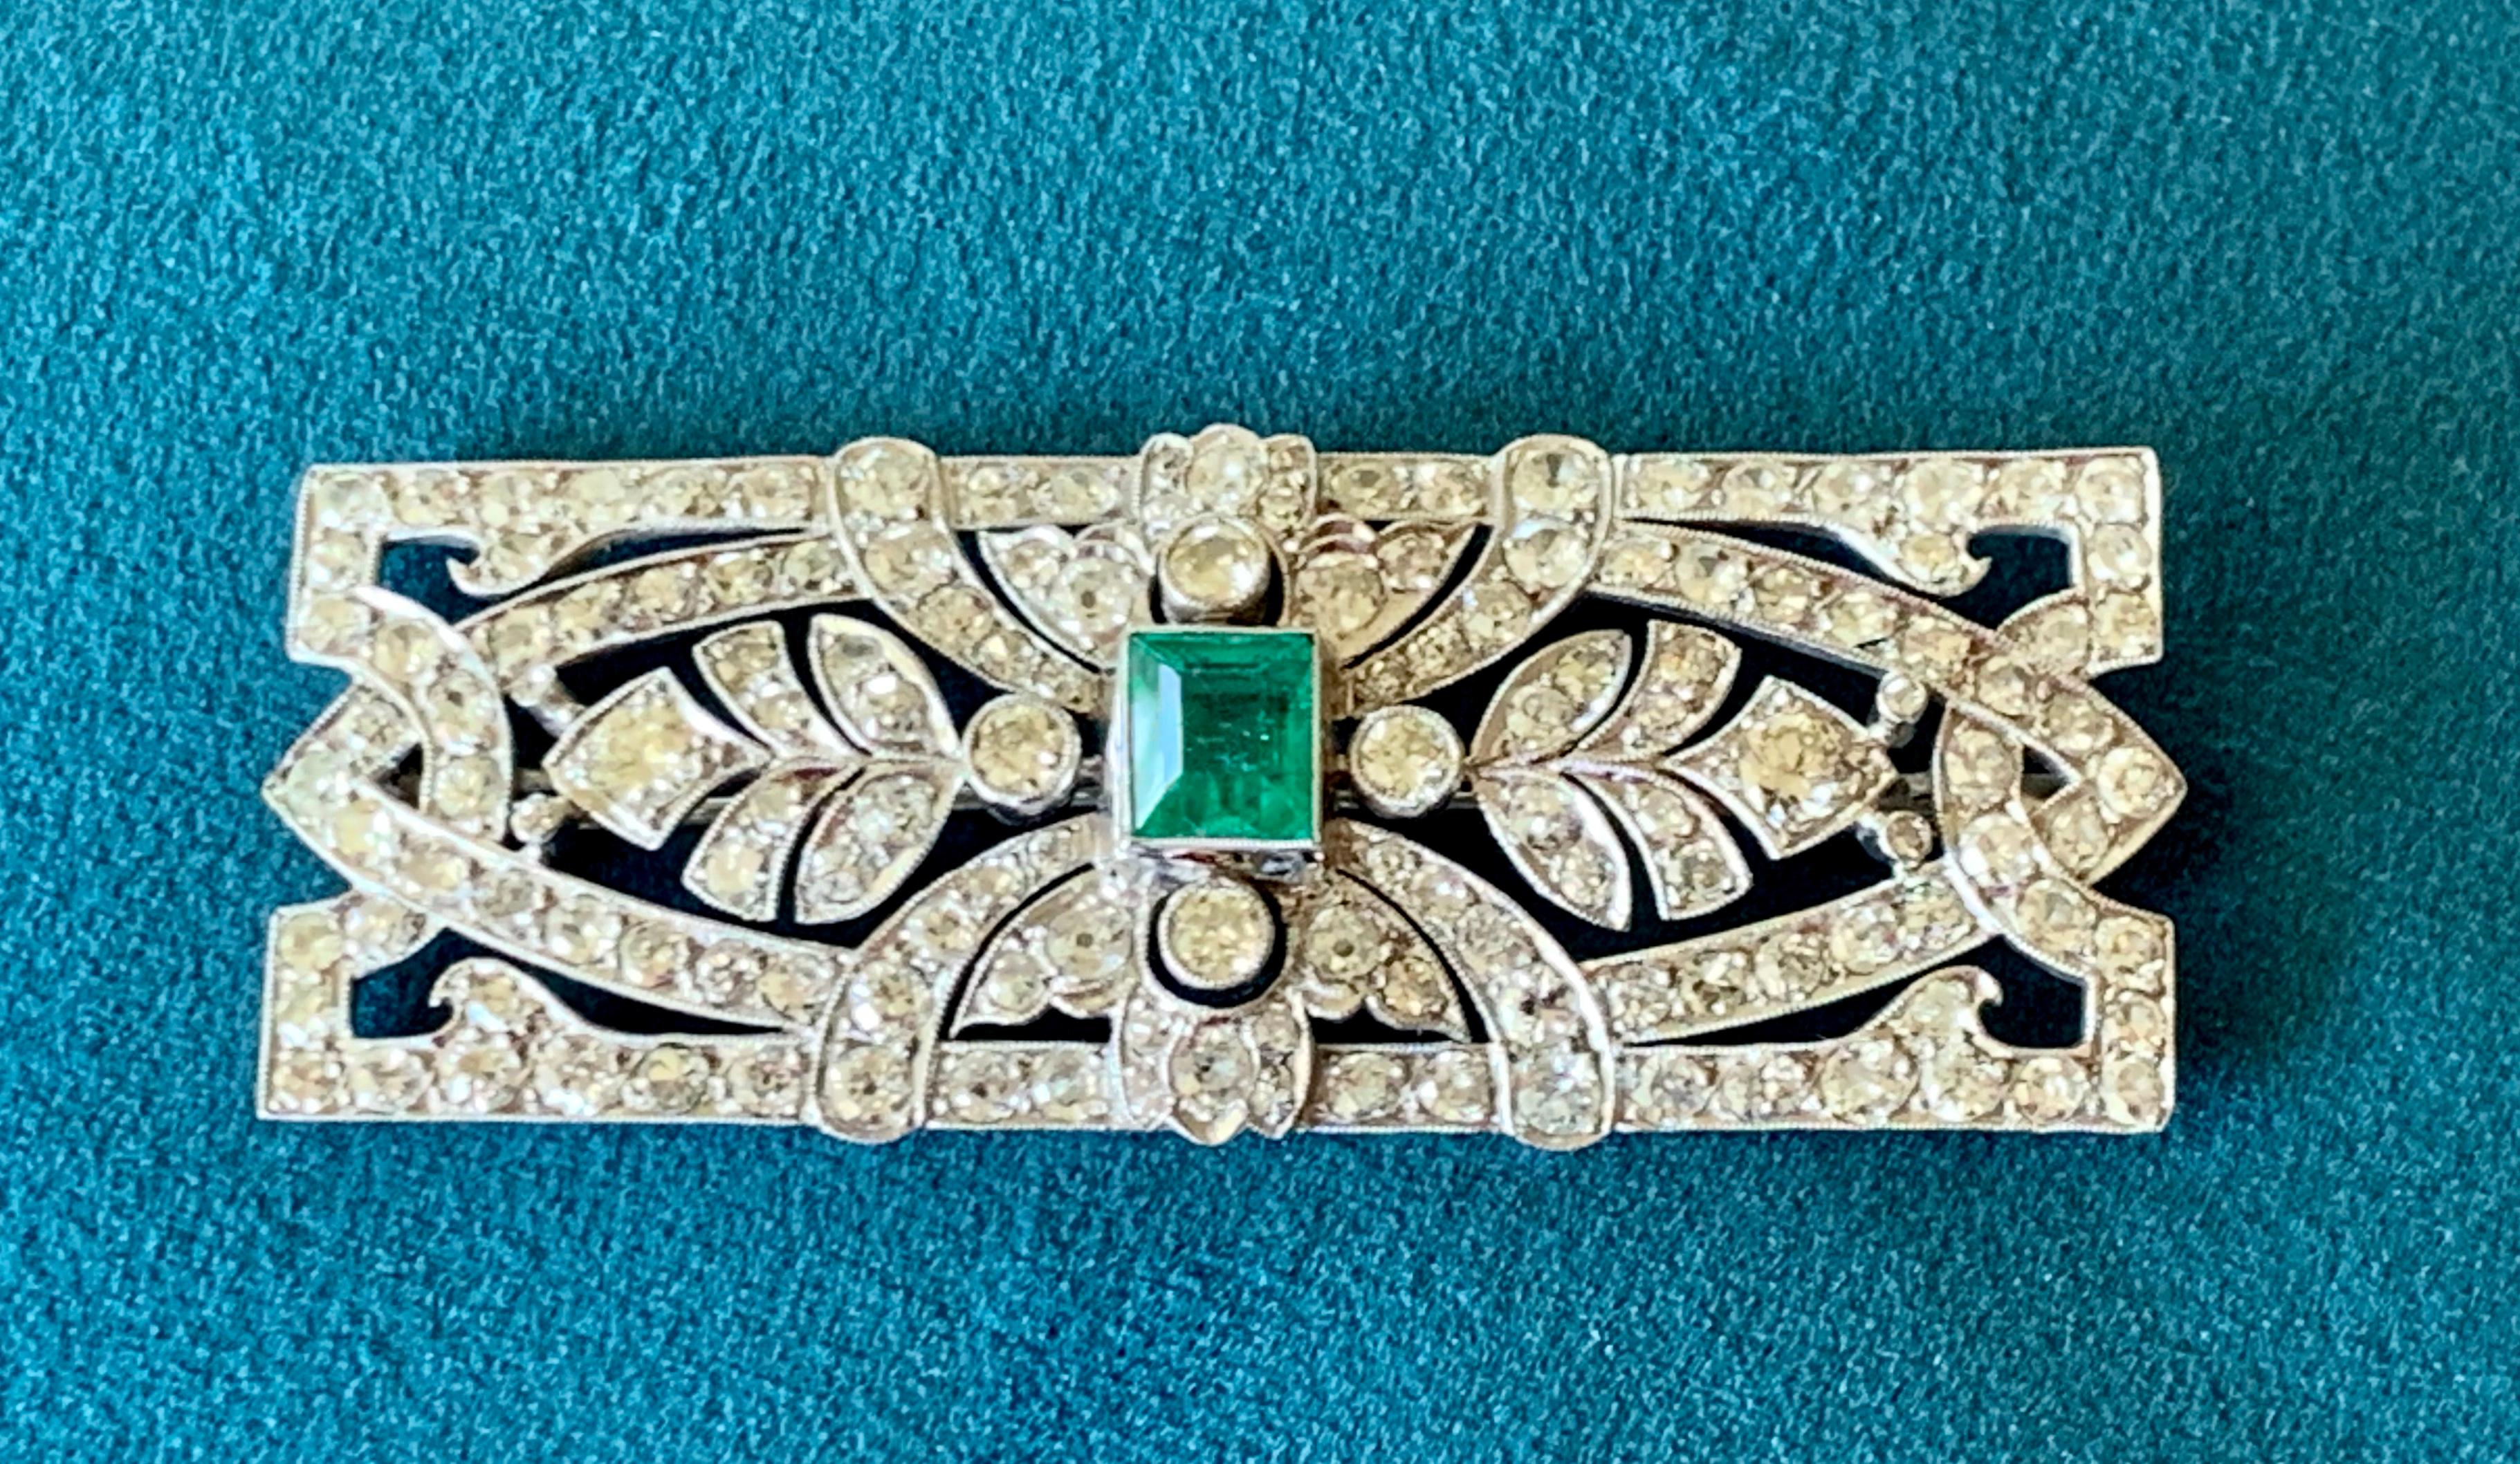 A splendorous original Art Deco brooch, circa 1920. A  vibrant green emerald of approximately 2 ct  is the center of attention of this quintessential Deco design finely crafted in platinum. The entire brooch is further embellished with many bright